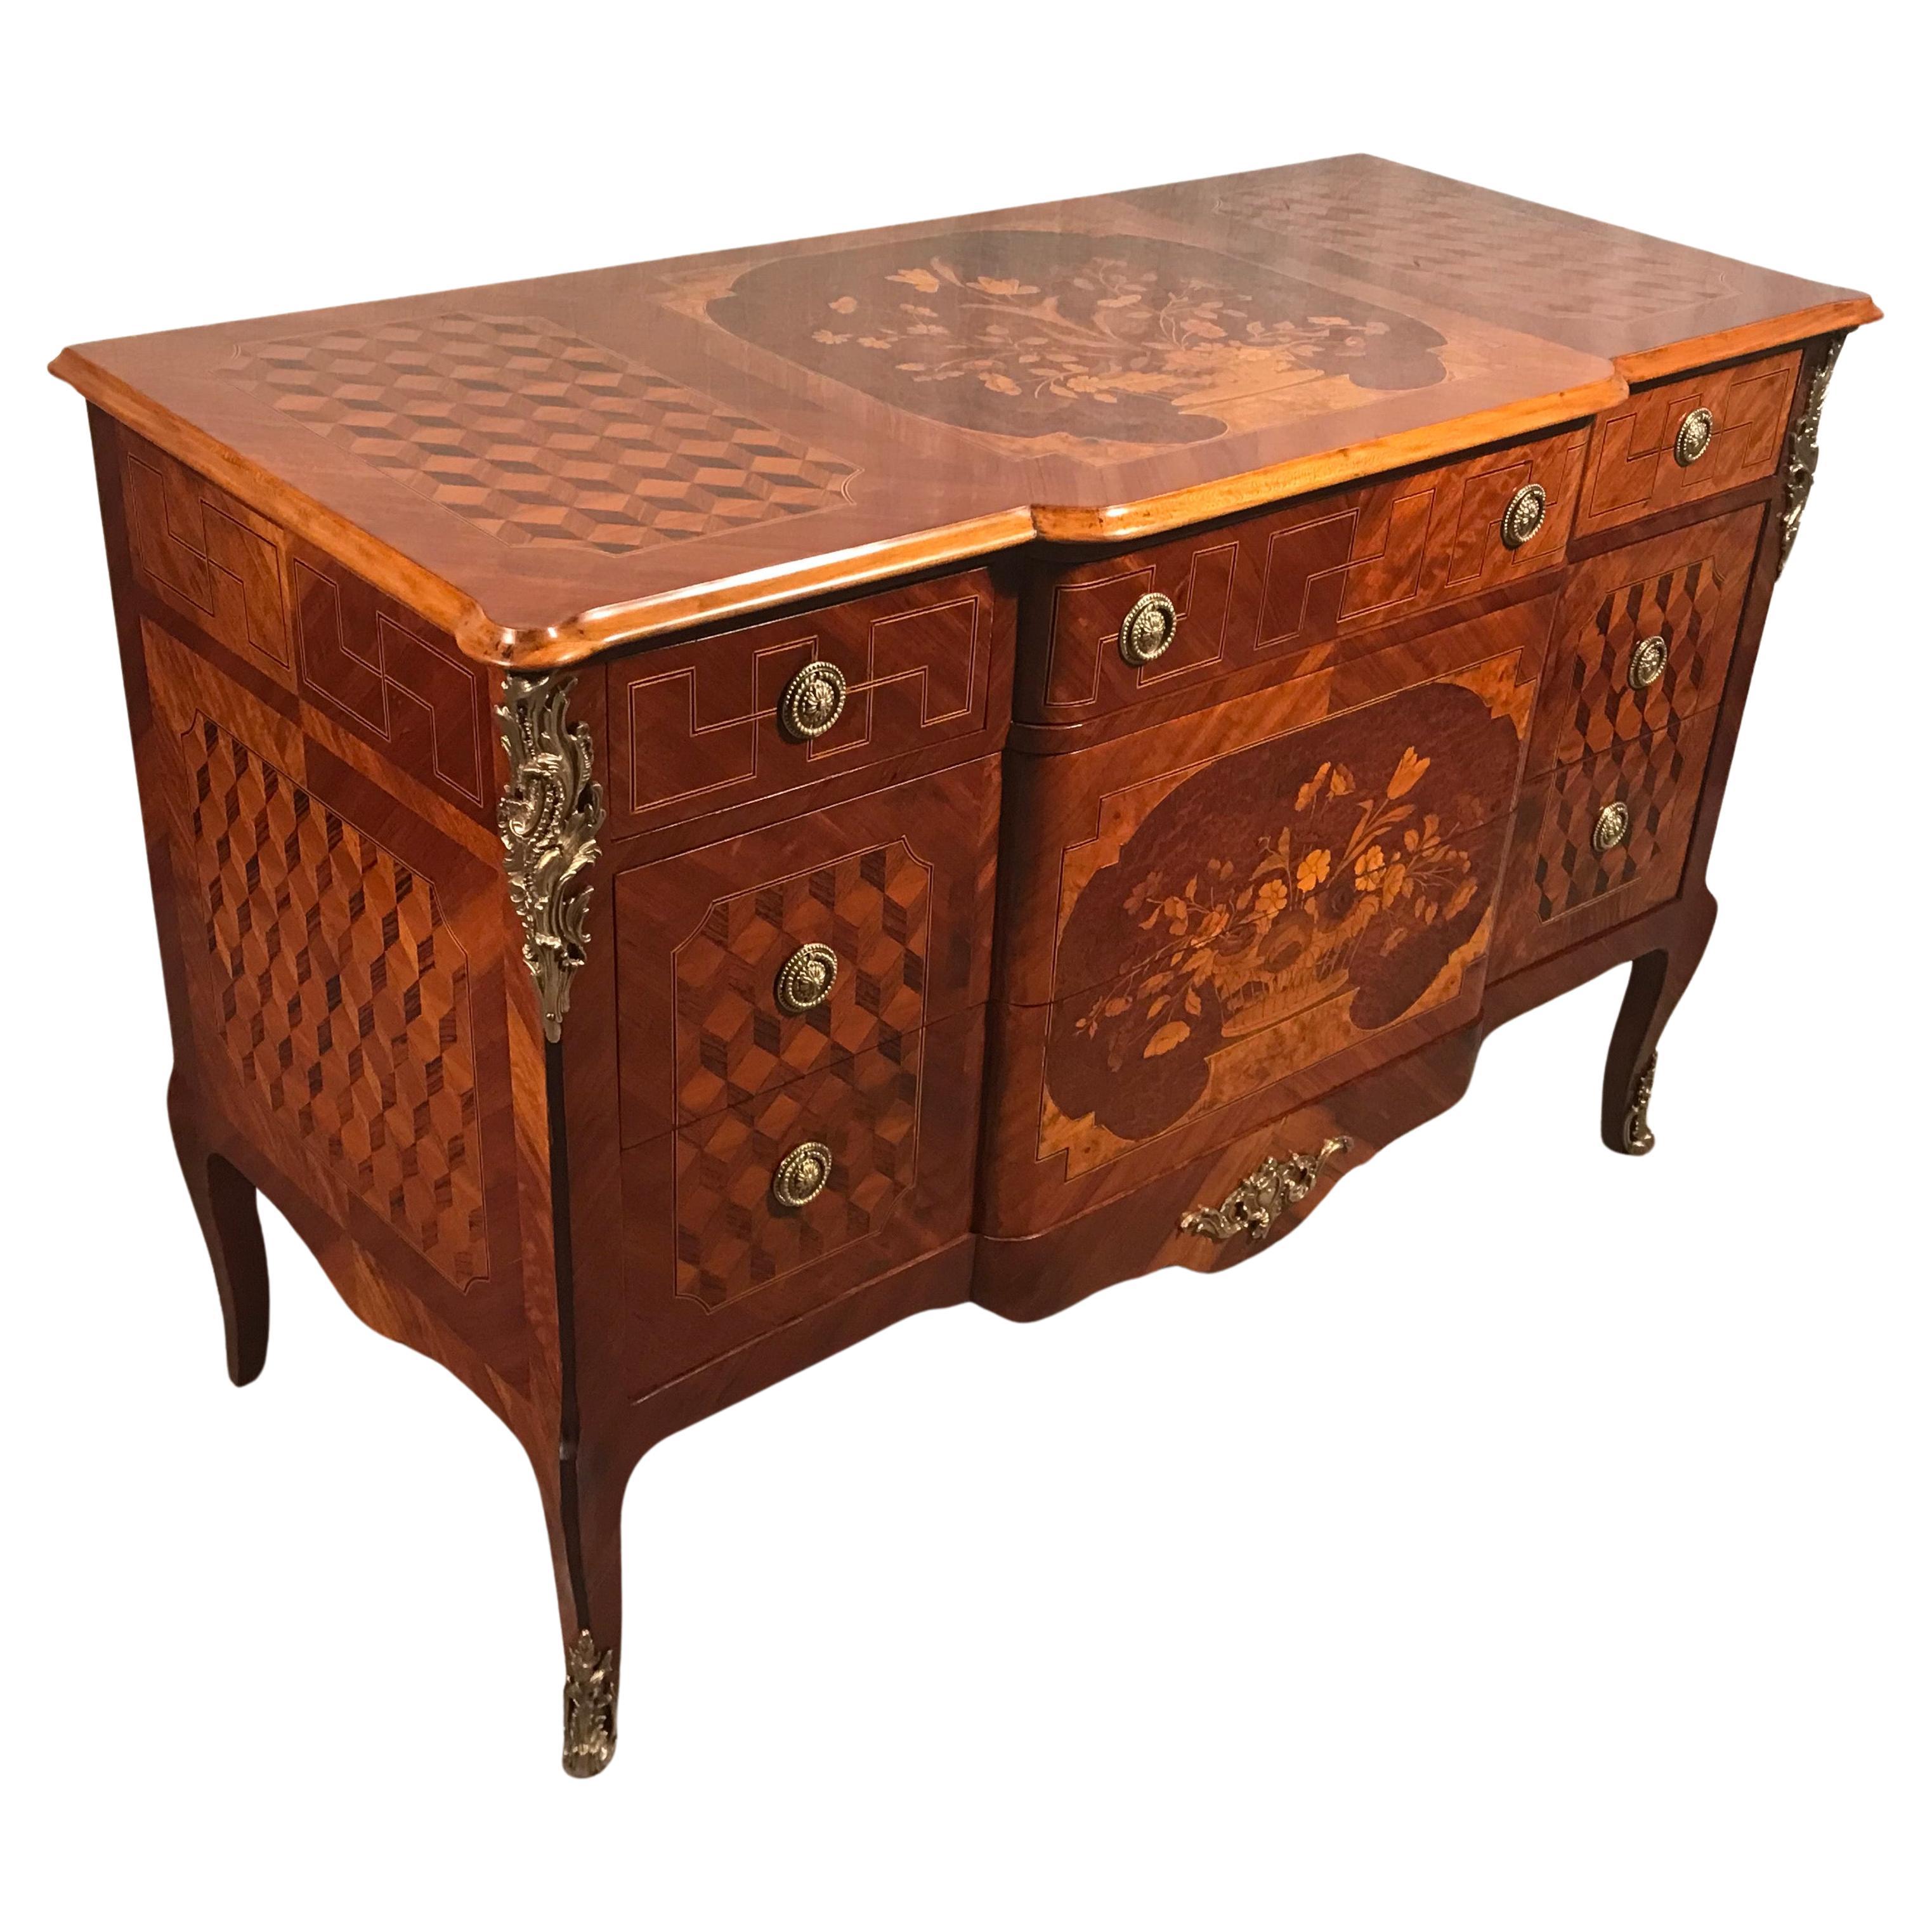 This remarkable chest of drawers, boasting the elegant Louis XVI Style, dates back to the late 19th century. Comprising five drawers, this commode features exquisite marquetry work that truly captivates the eye. The central portion of both the front